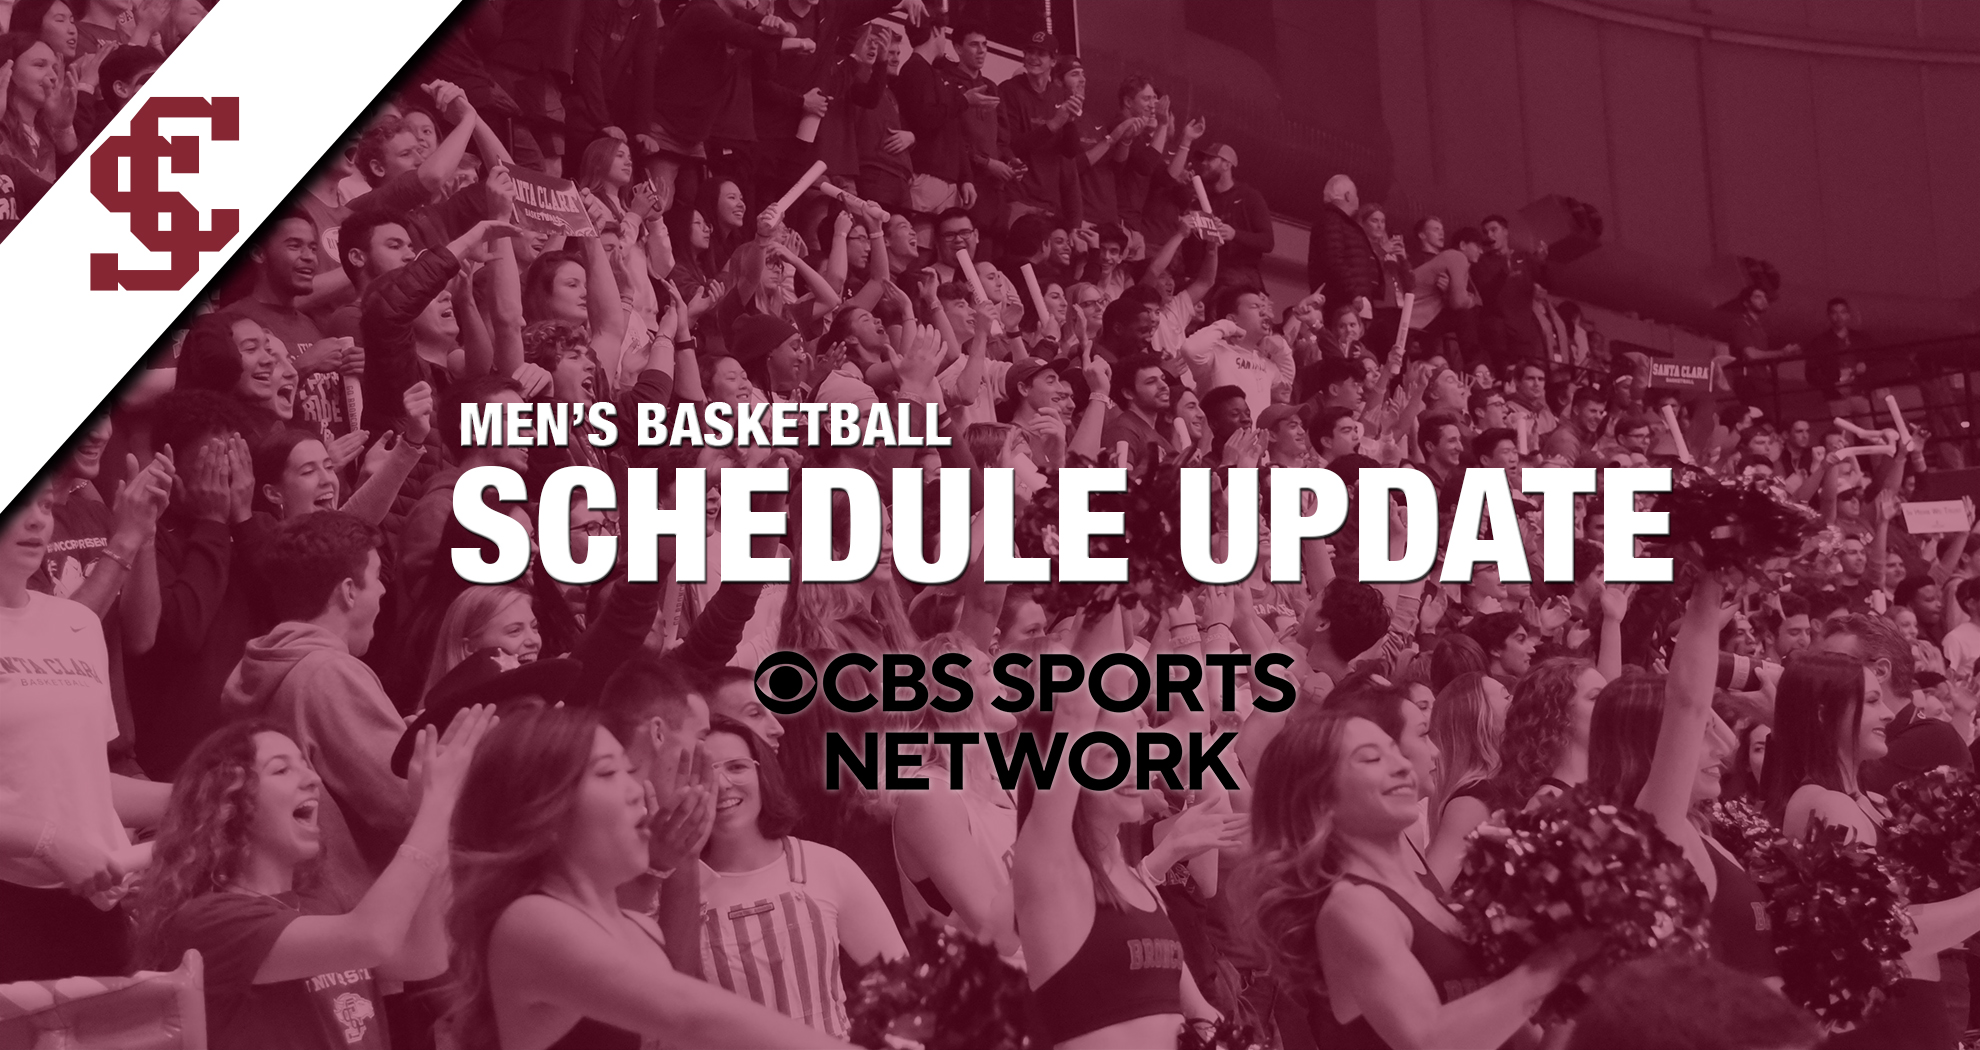 Two Men's Basketball Games to Air on CBS Sports Network